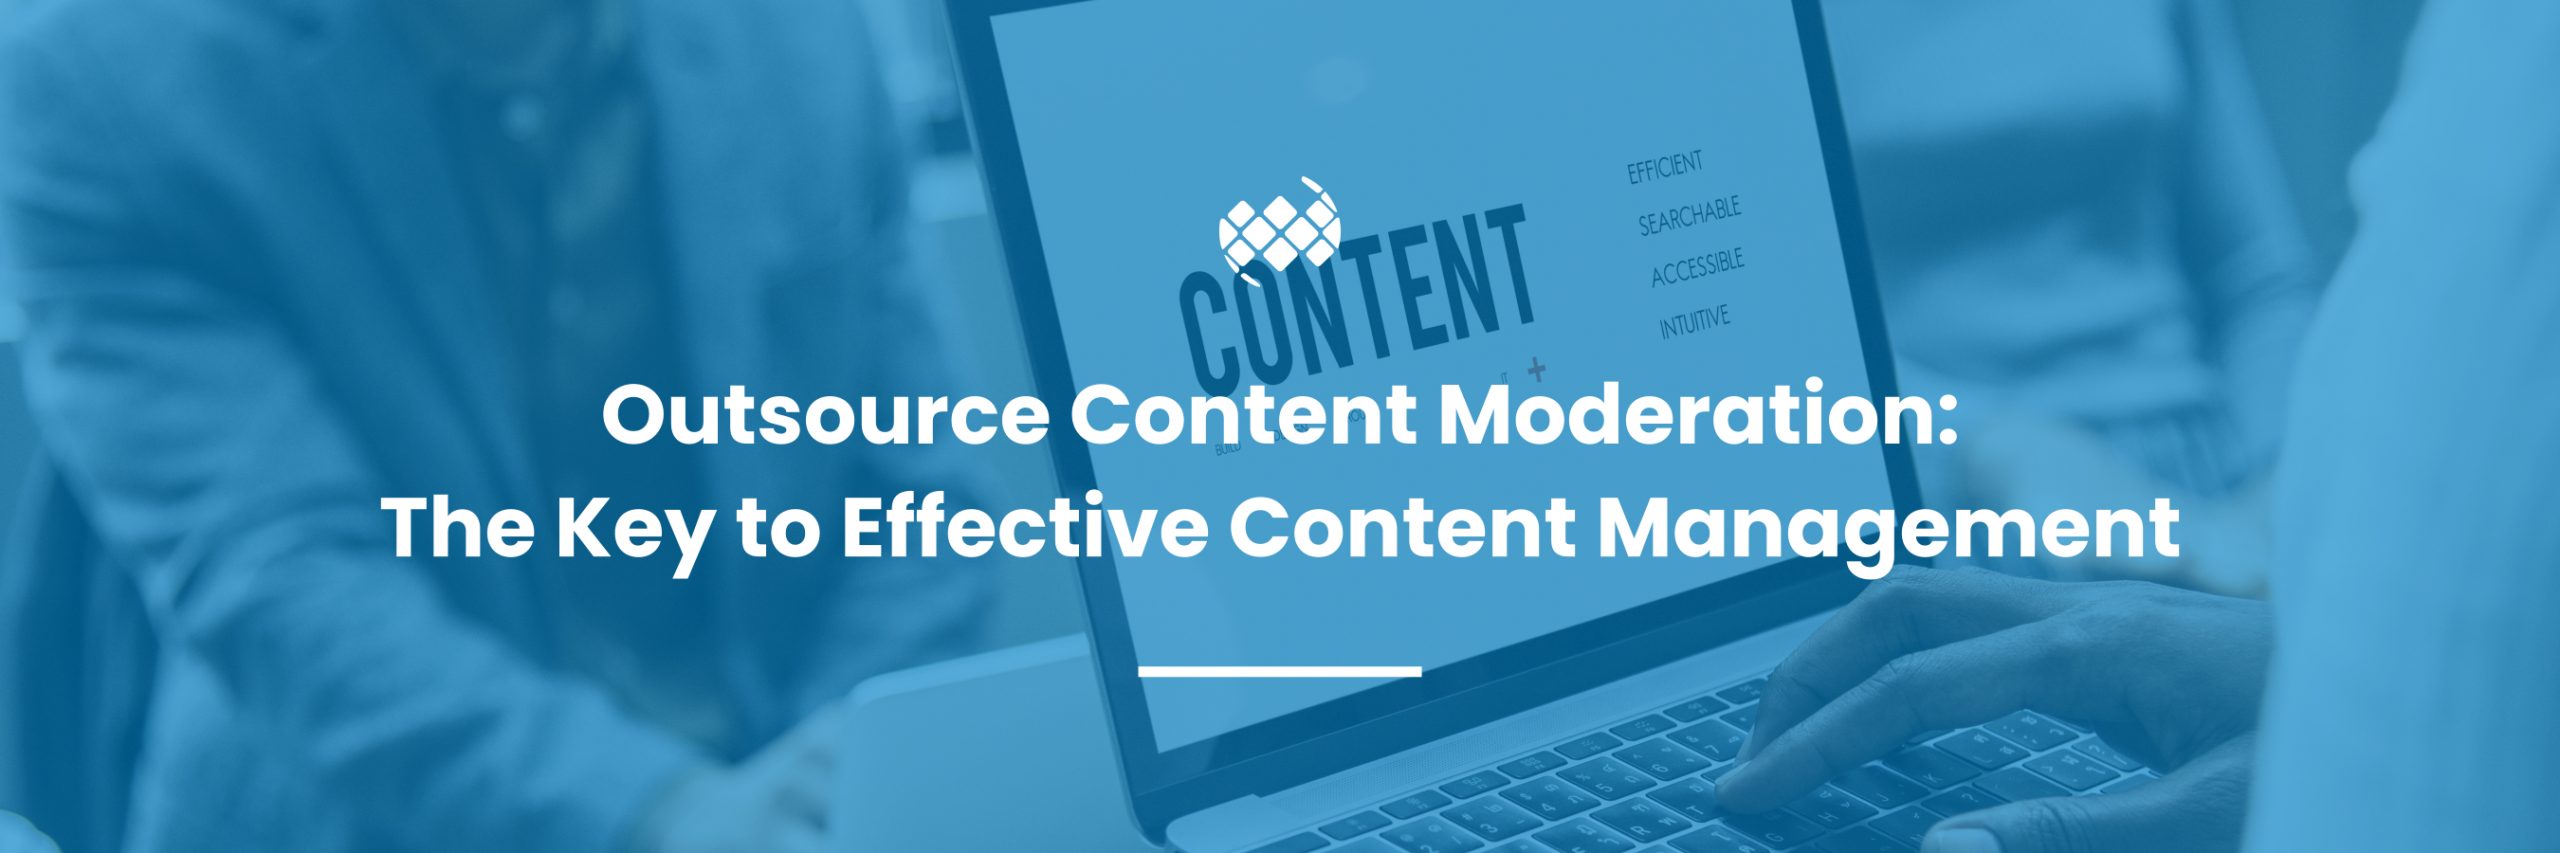 Outsource Content Moderation